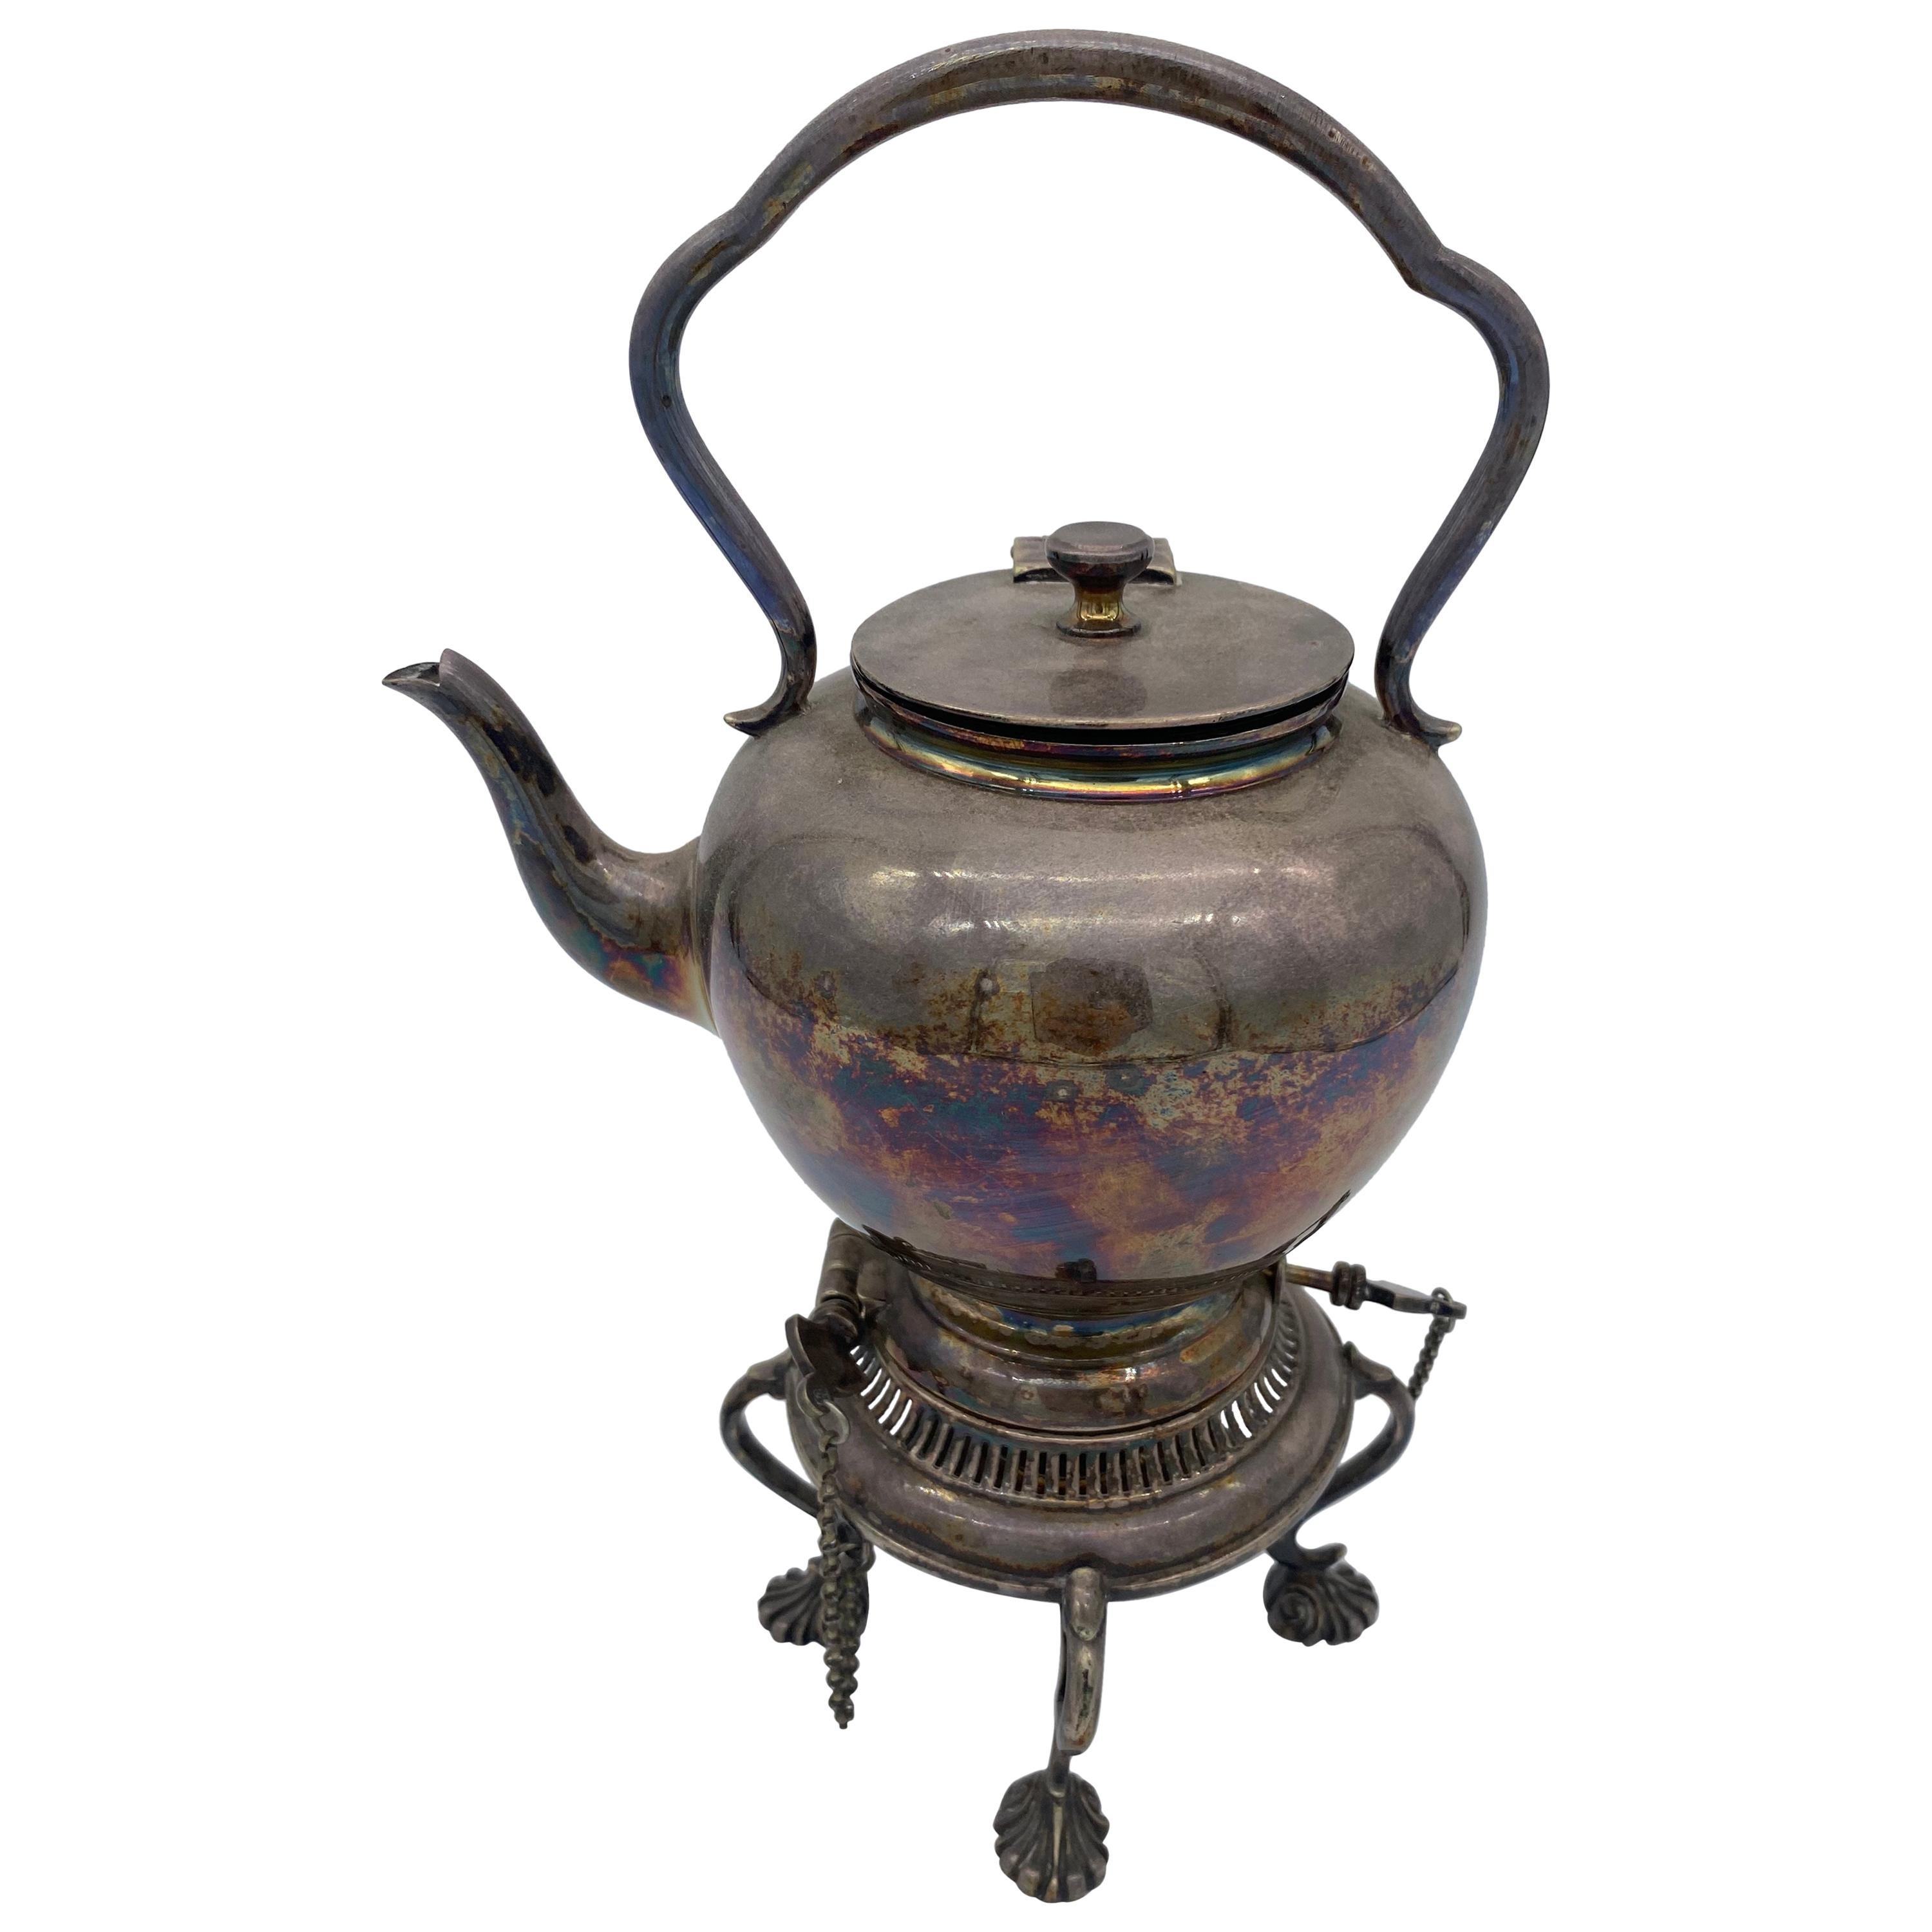 Are silver teapots safe to use?